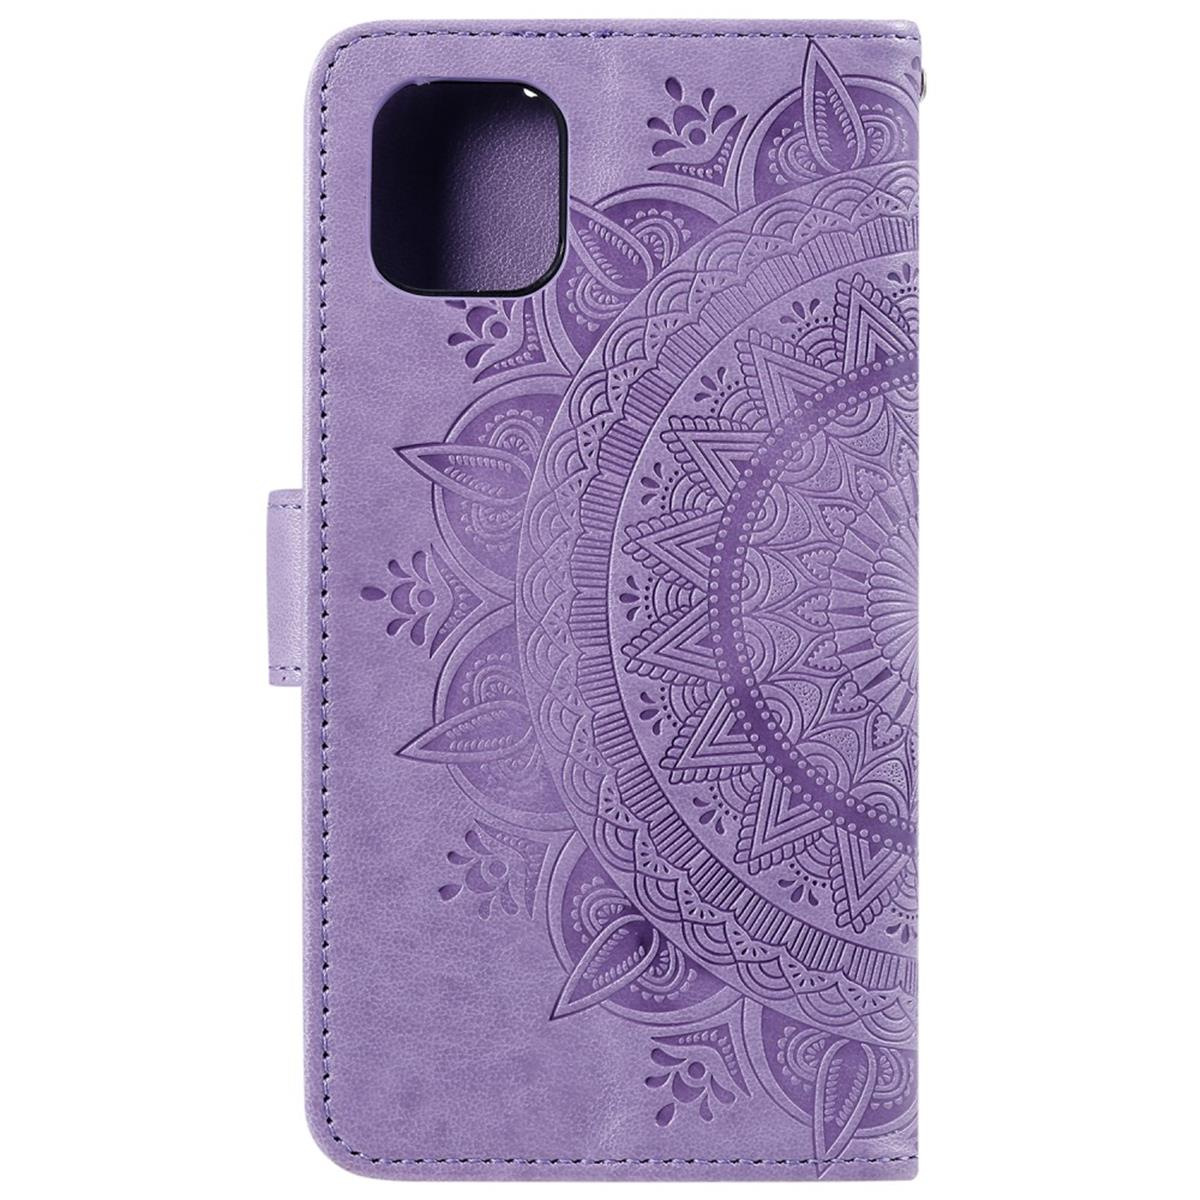 COVERKINGZ Klapphülle mit Mandala Muster, Bookcover, Lila Apple, 11, iPhone